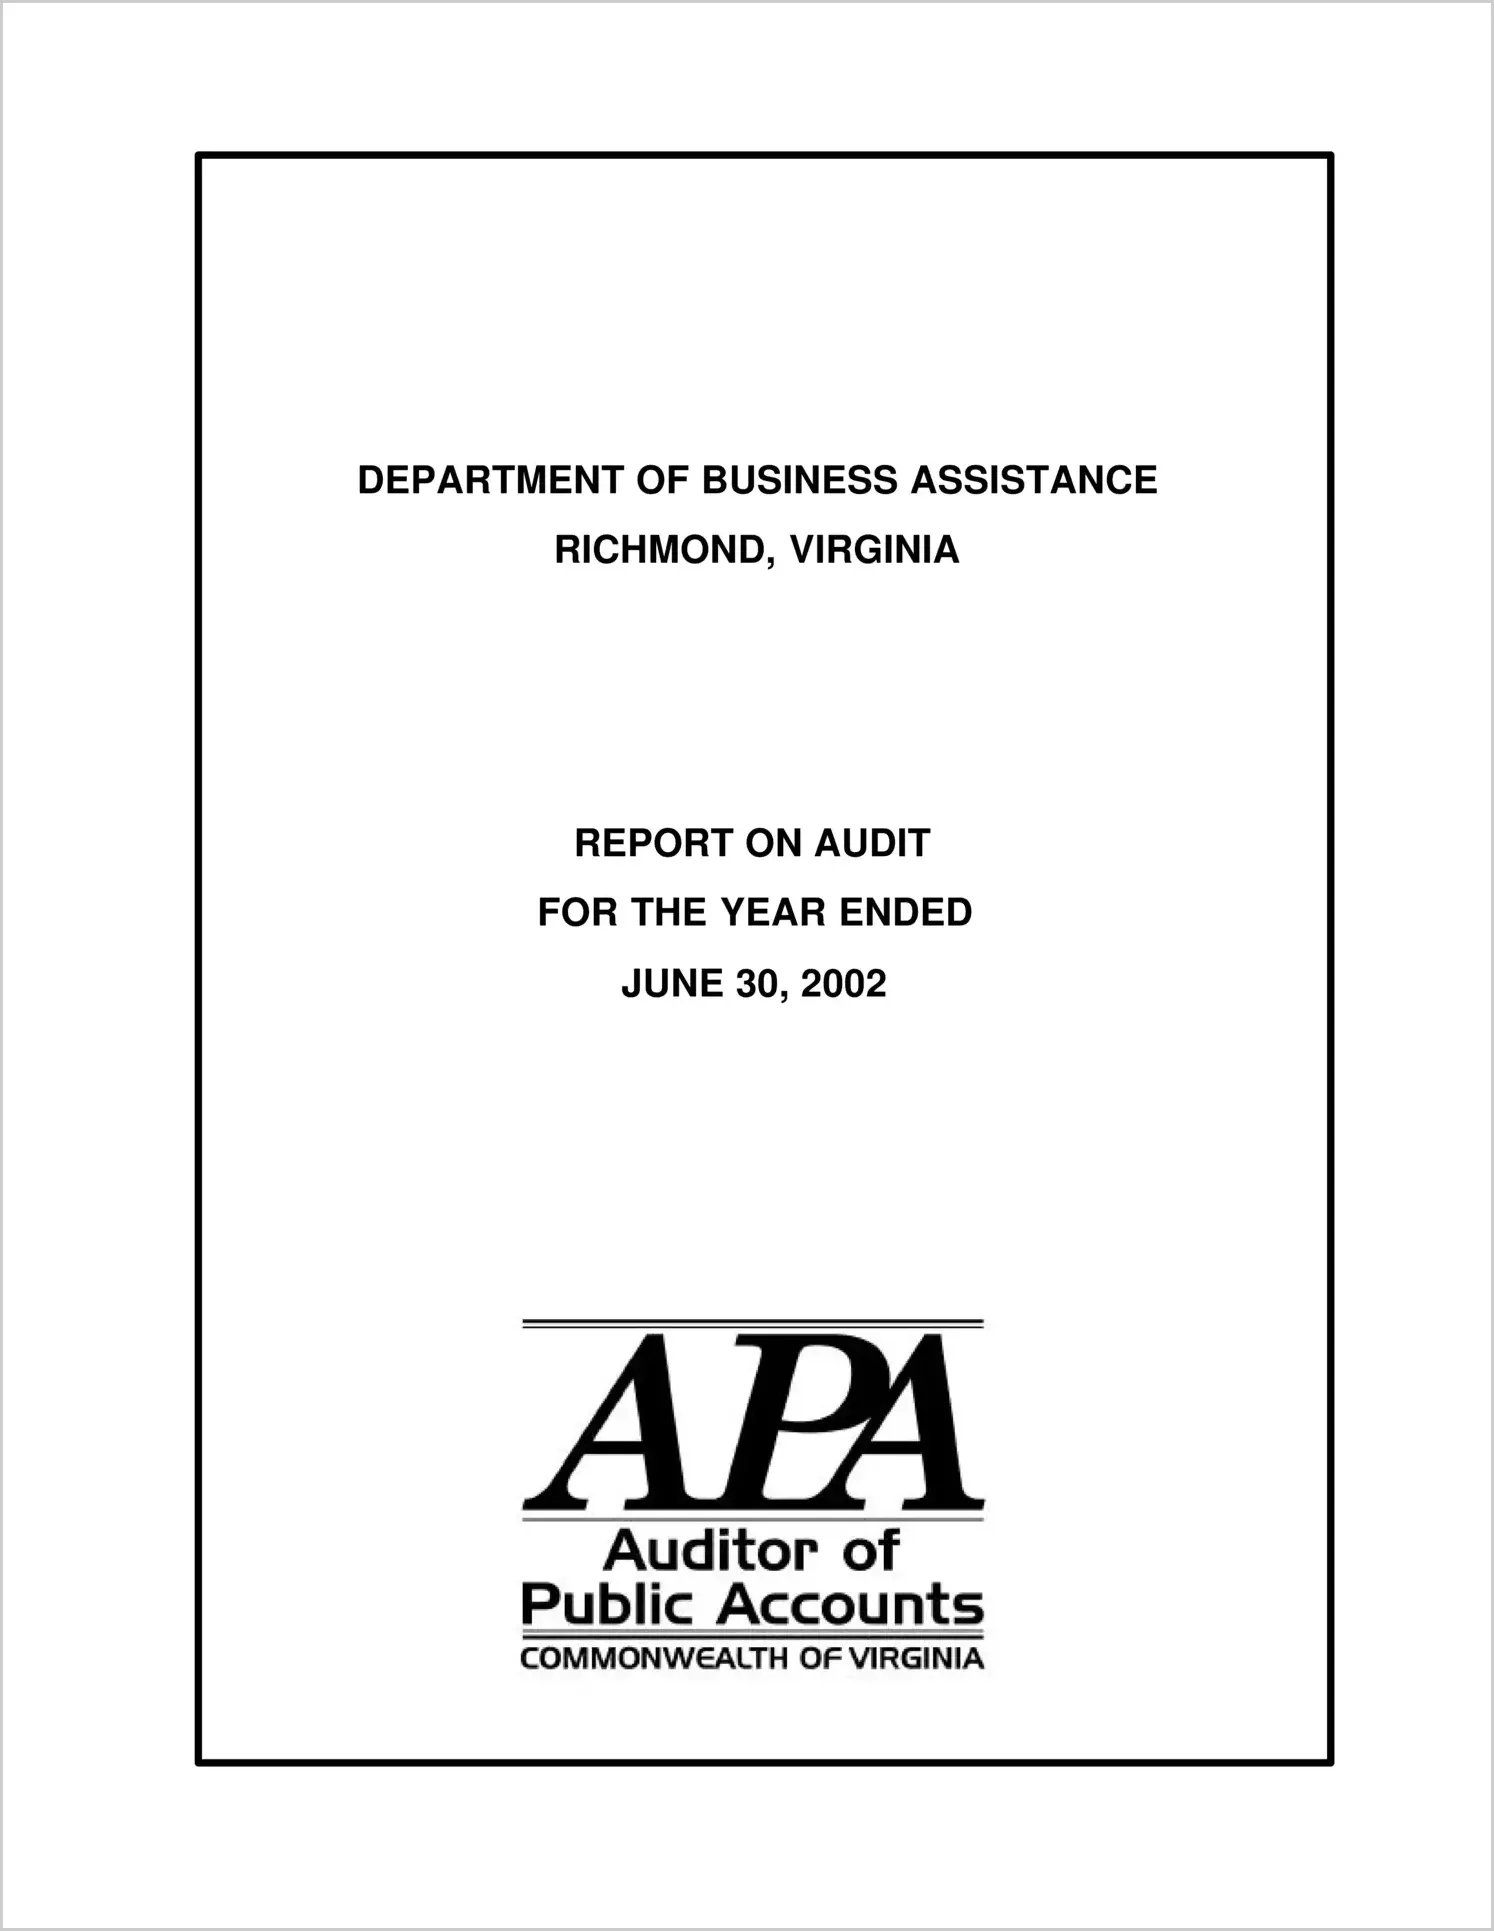 Department of Business Assistance for the year ended June 30, 2002